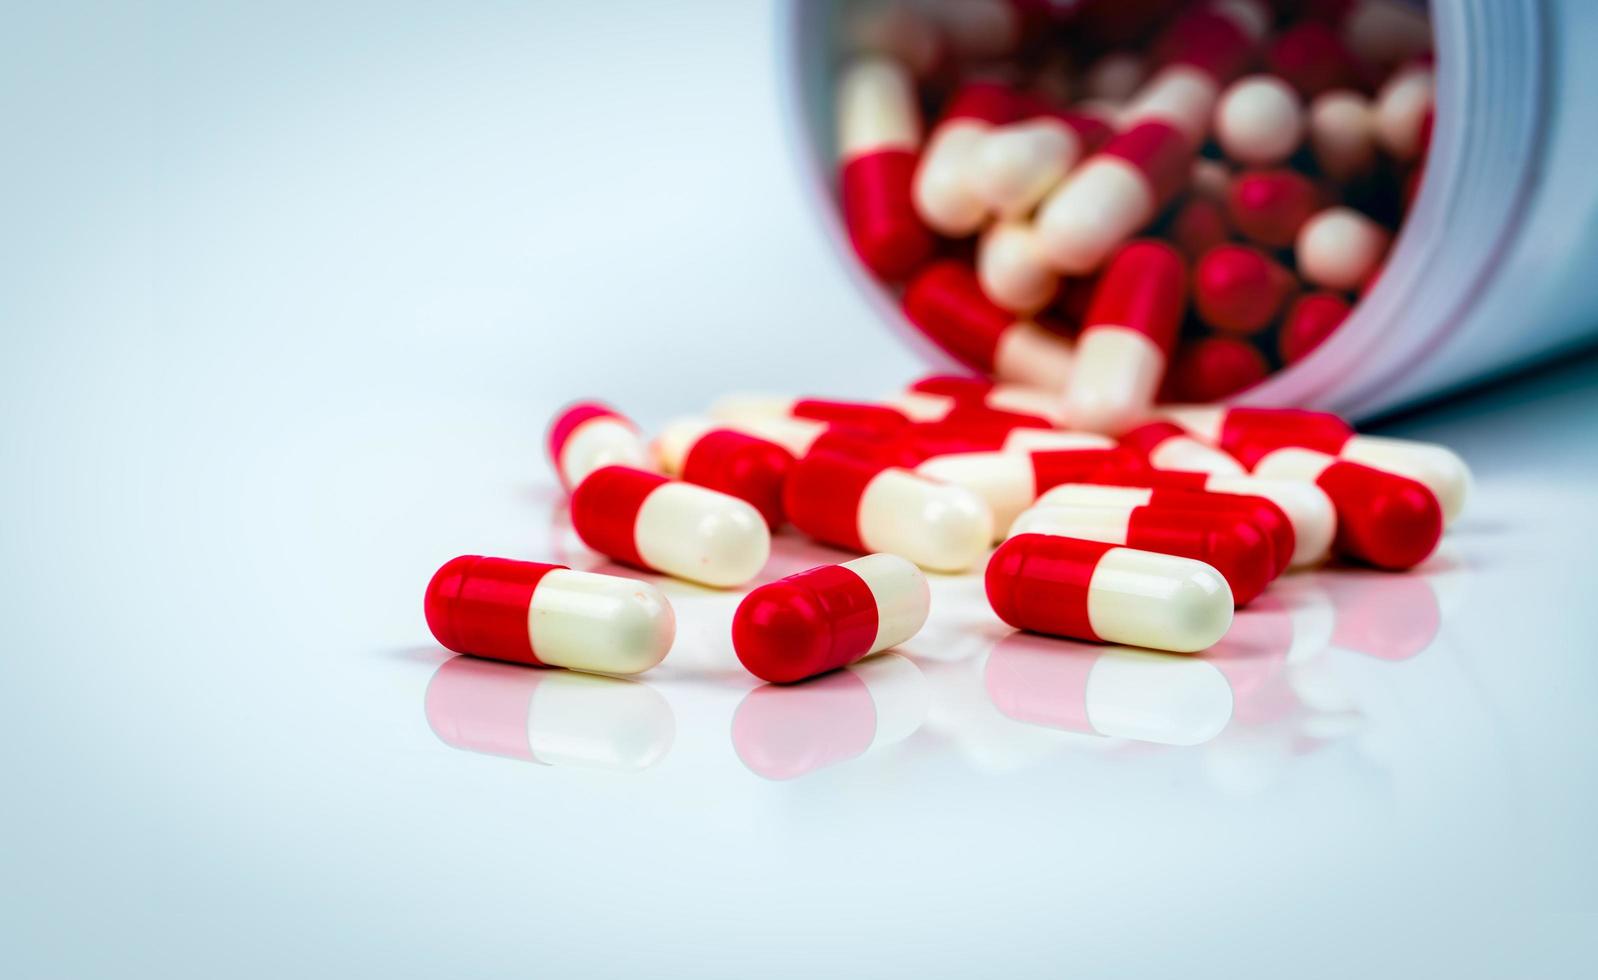 Red-white capsule pills on white table on blurred background of drug bottle. Antibiotics drug resistance. Antimicrobial capsule pills. Pharmaceutical industry. Pharmacy. Global healthcare concept. photo